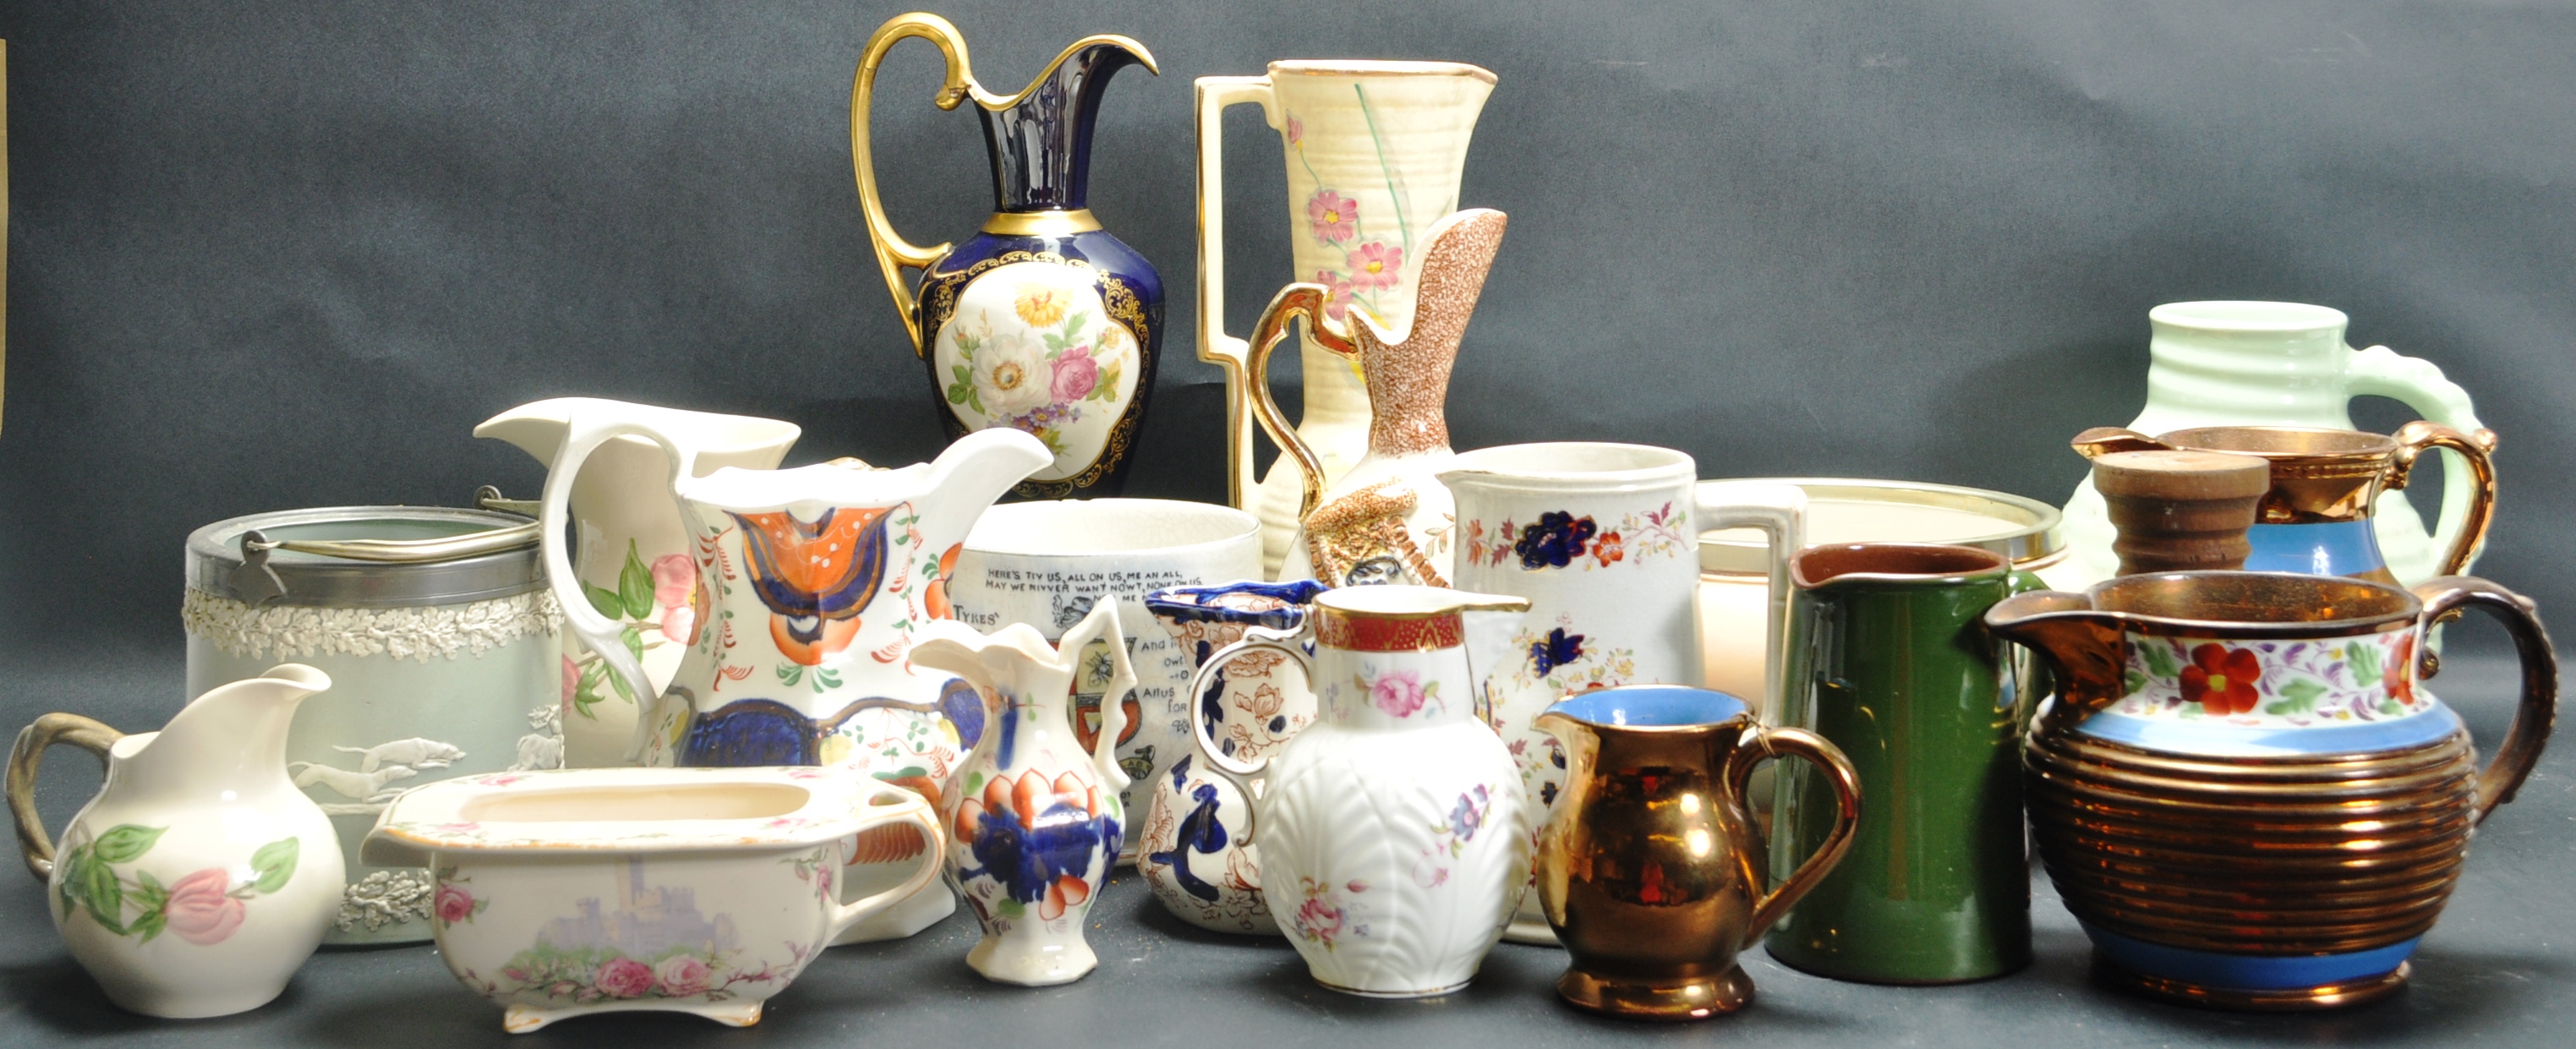 LARGE COLLECTION OF MID 20TH CENTURY CERAMIC WARE